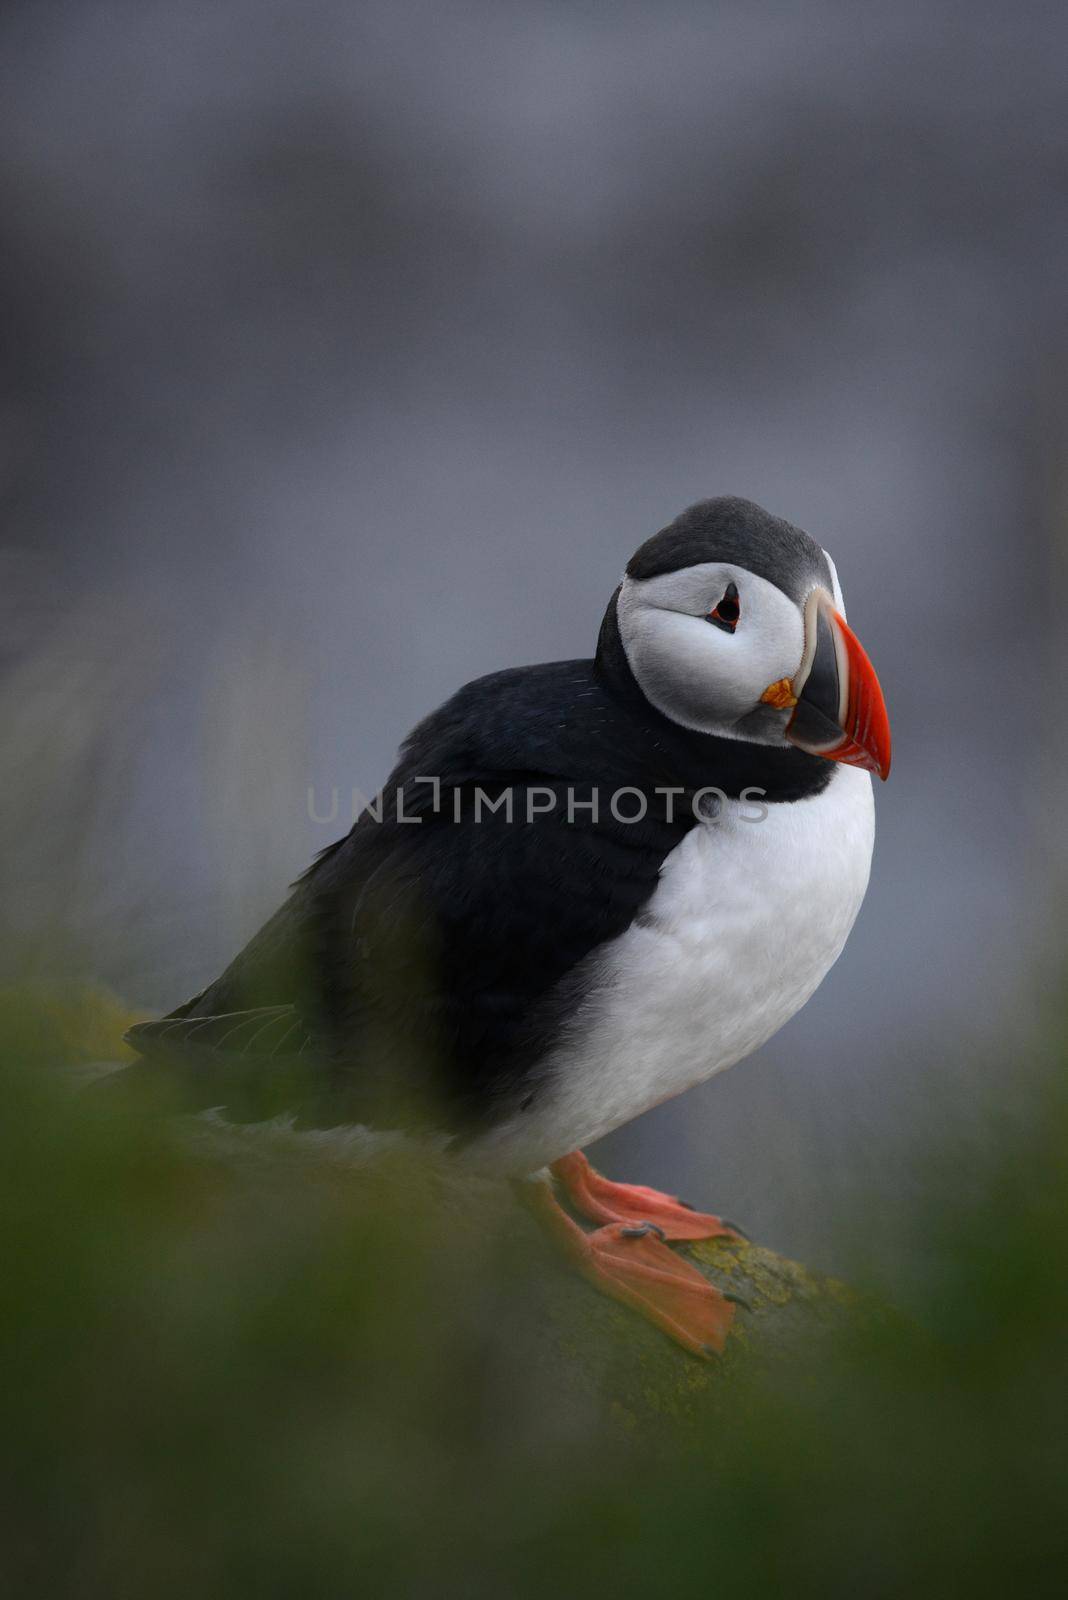 Puffin from Iceland by porbital